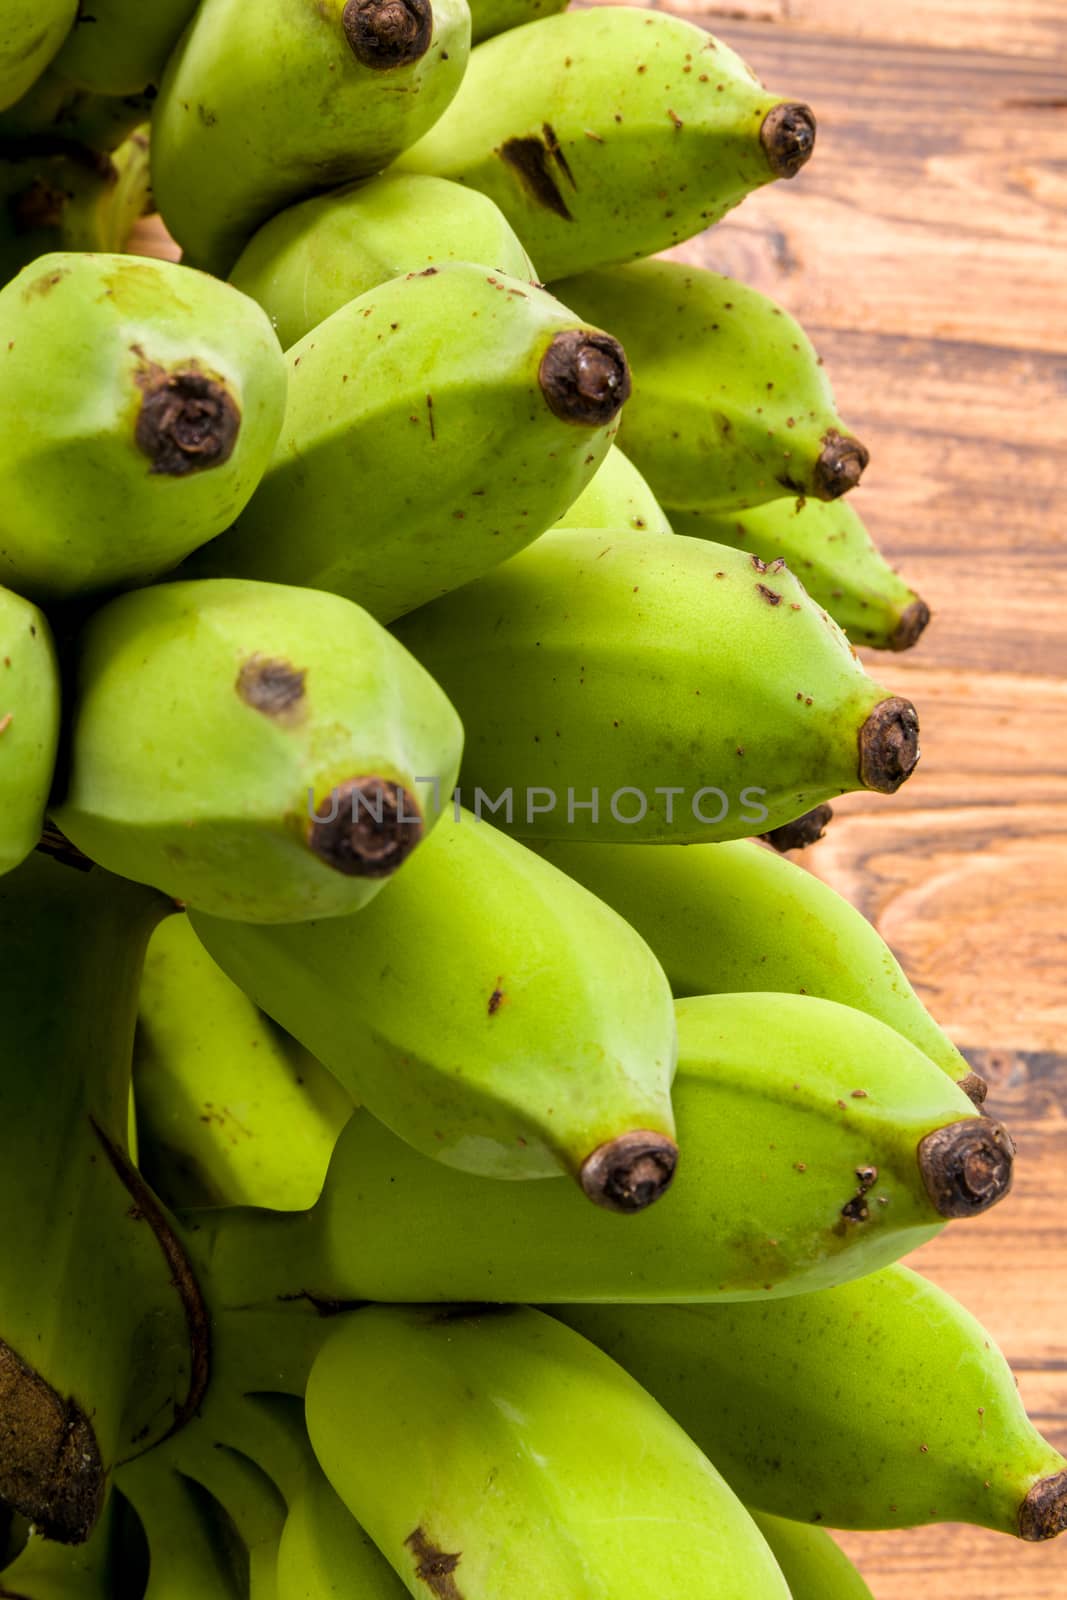 Bunch of unripe banana on wooden background.